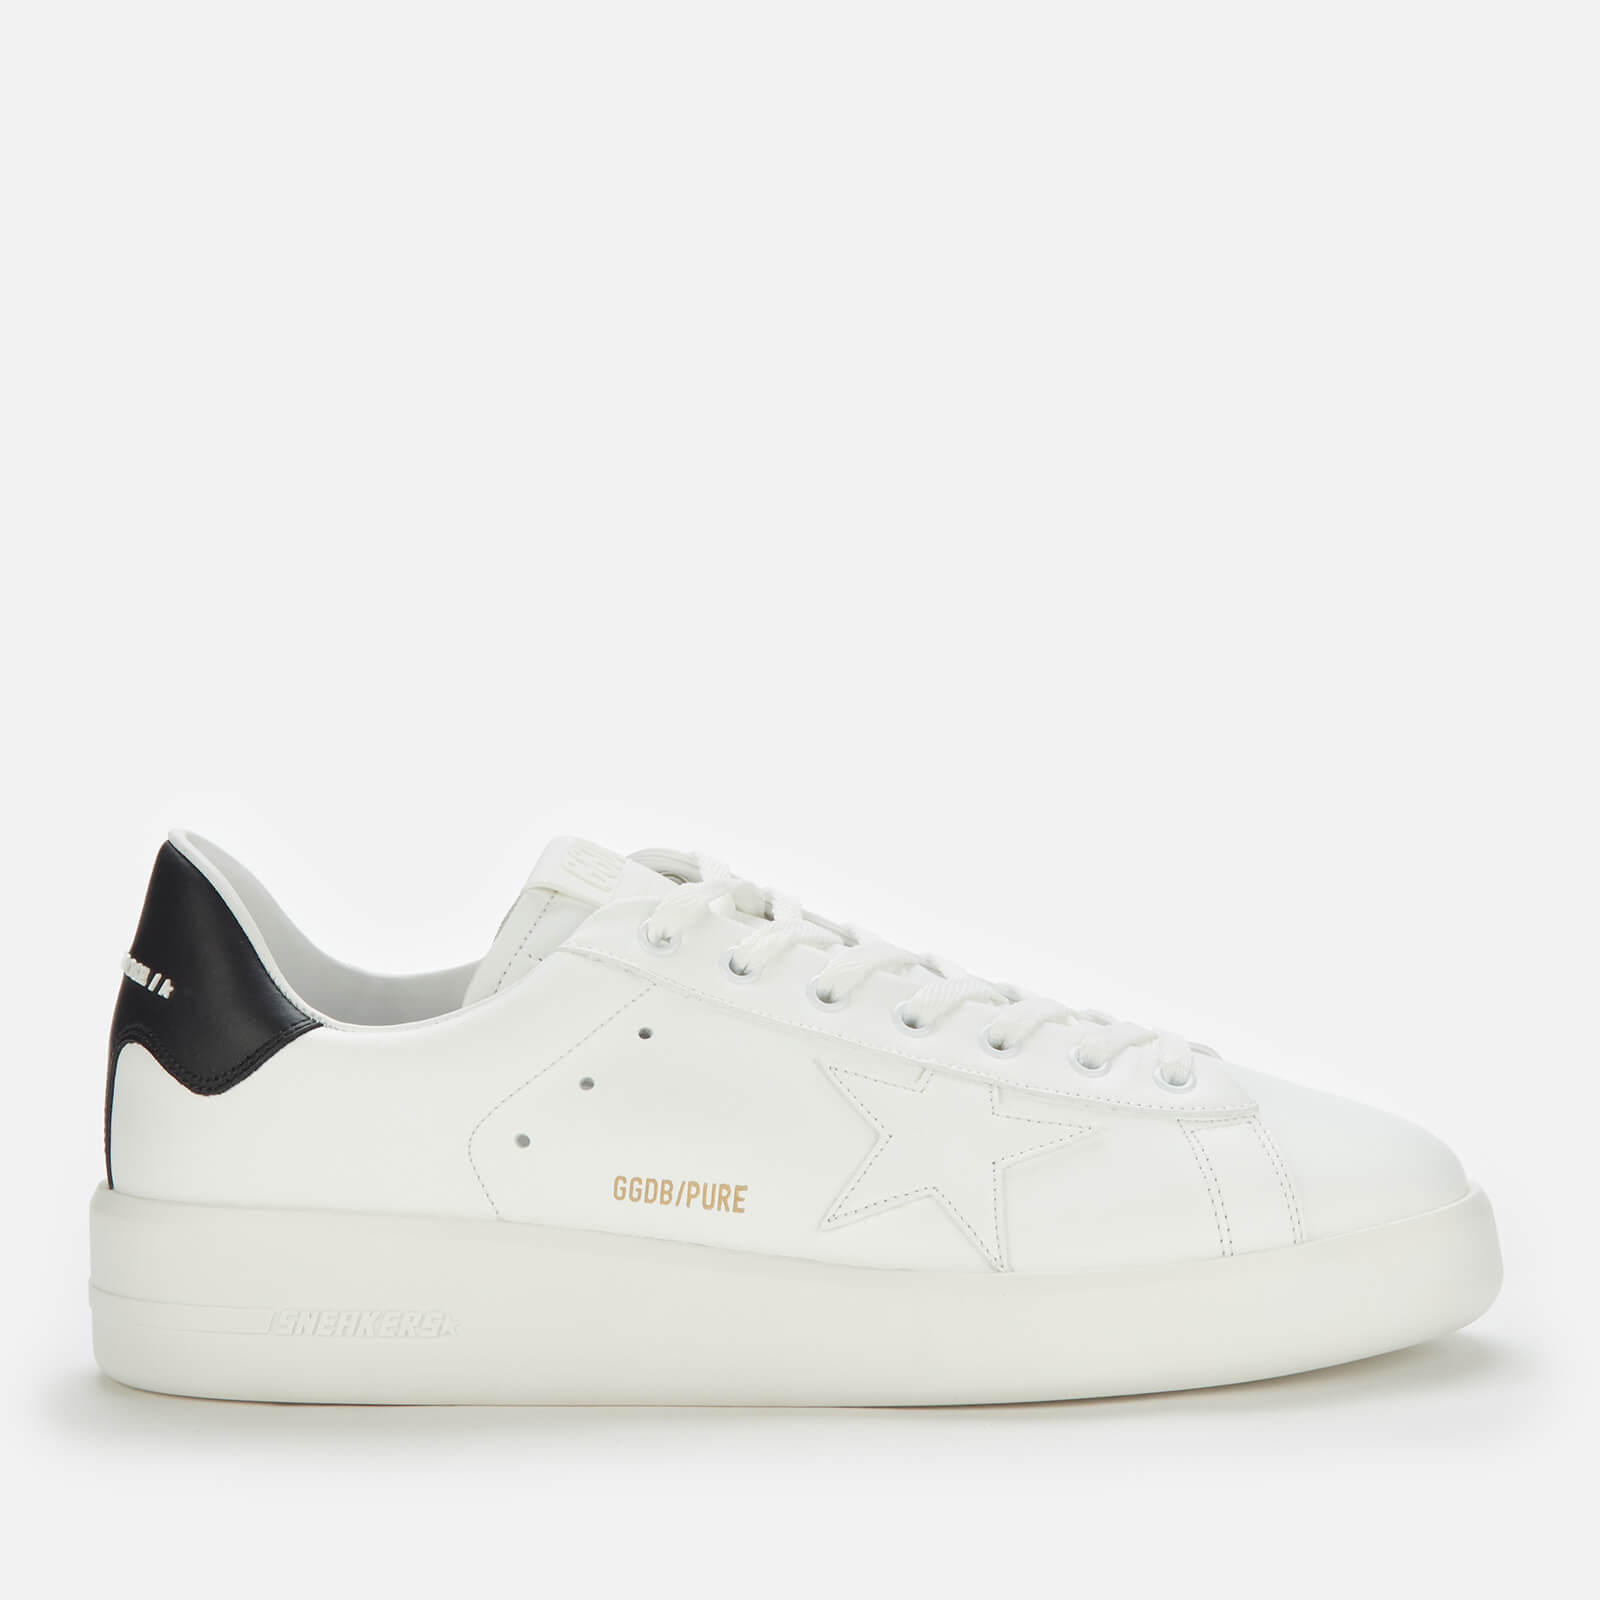 Golden Goose Deluxe Brand Men's Pure Star Leather Chunky Trainers - White/Black - UK 8